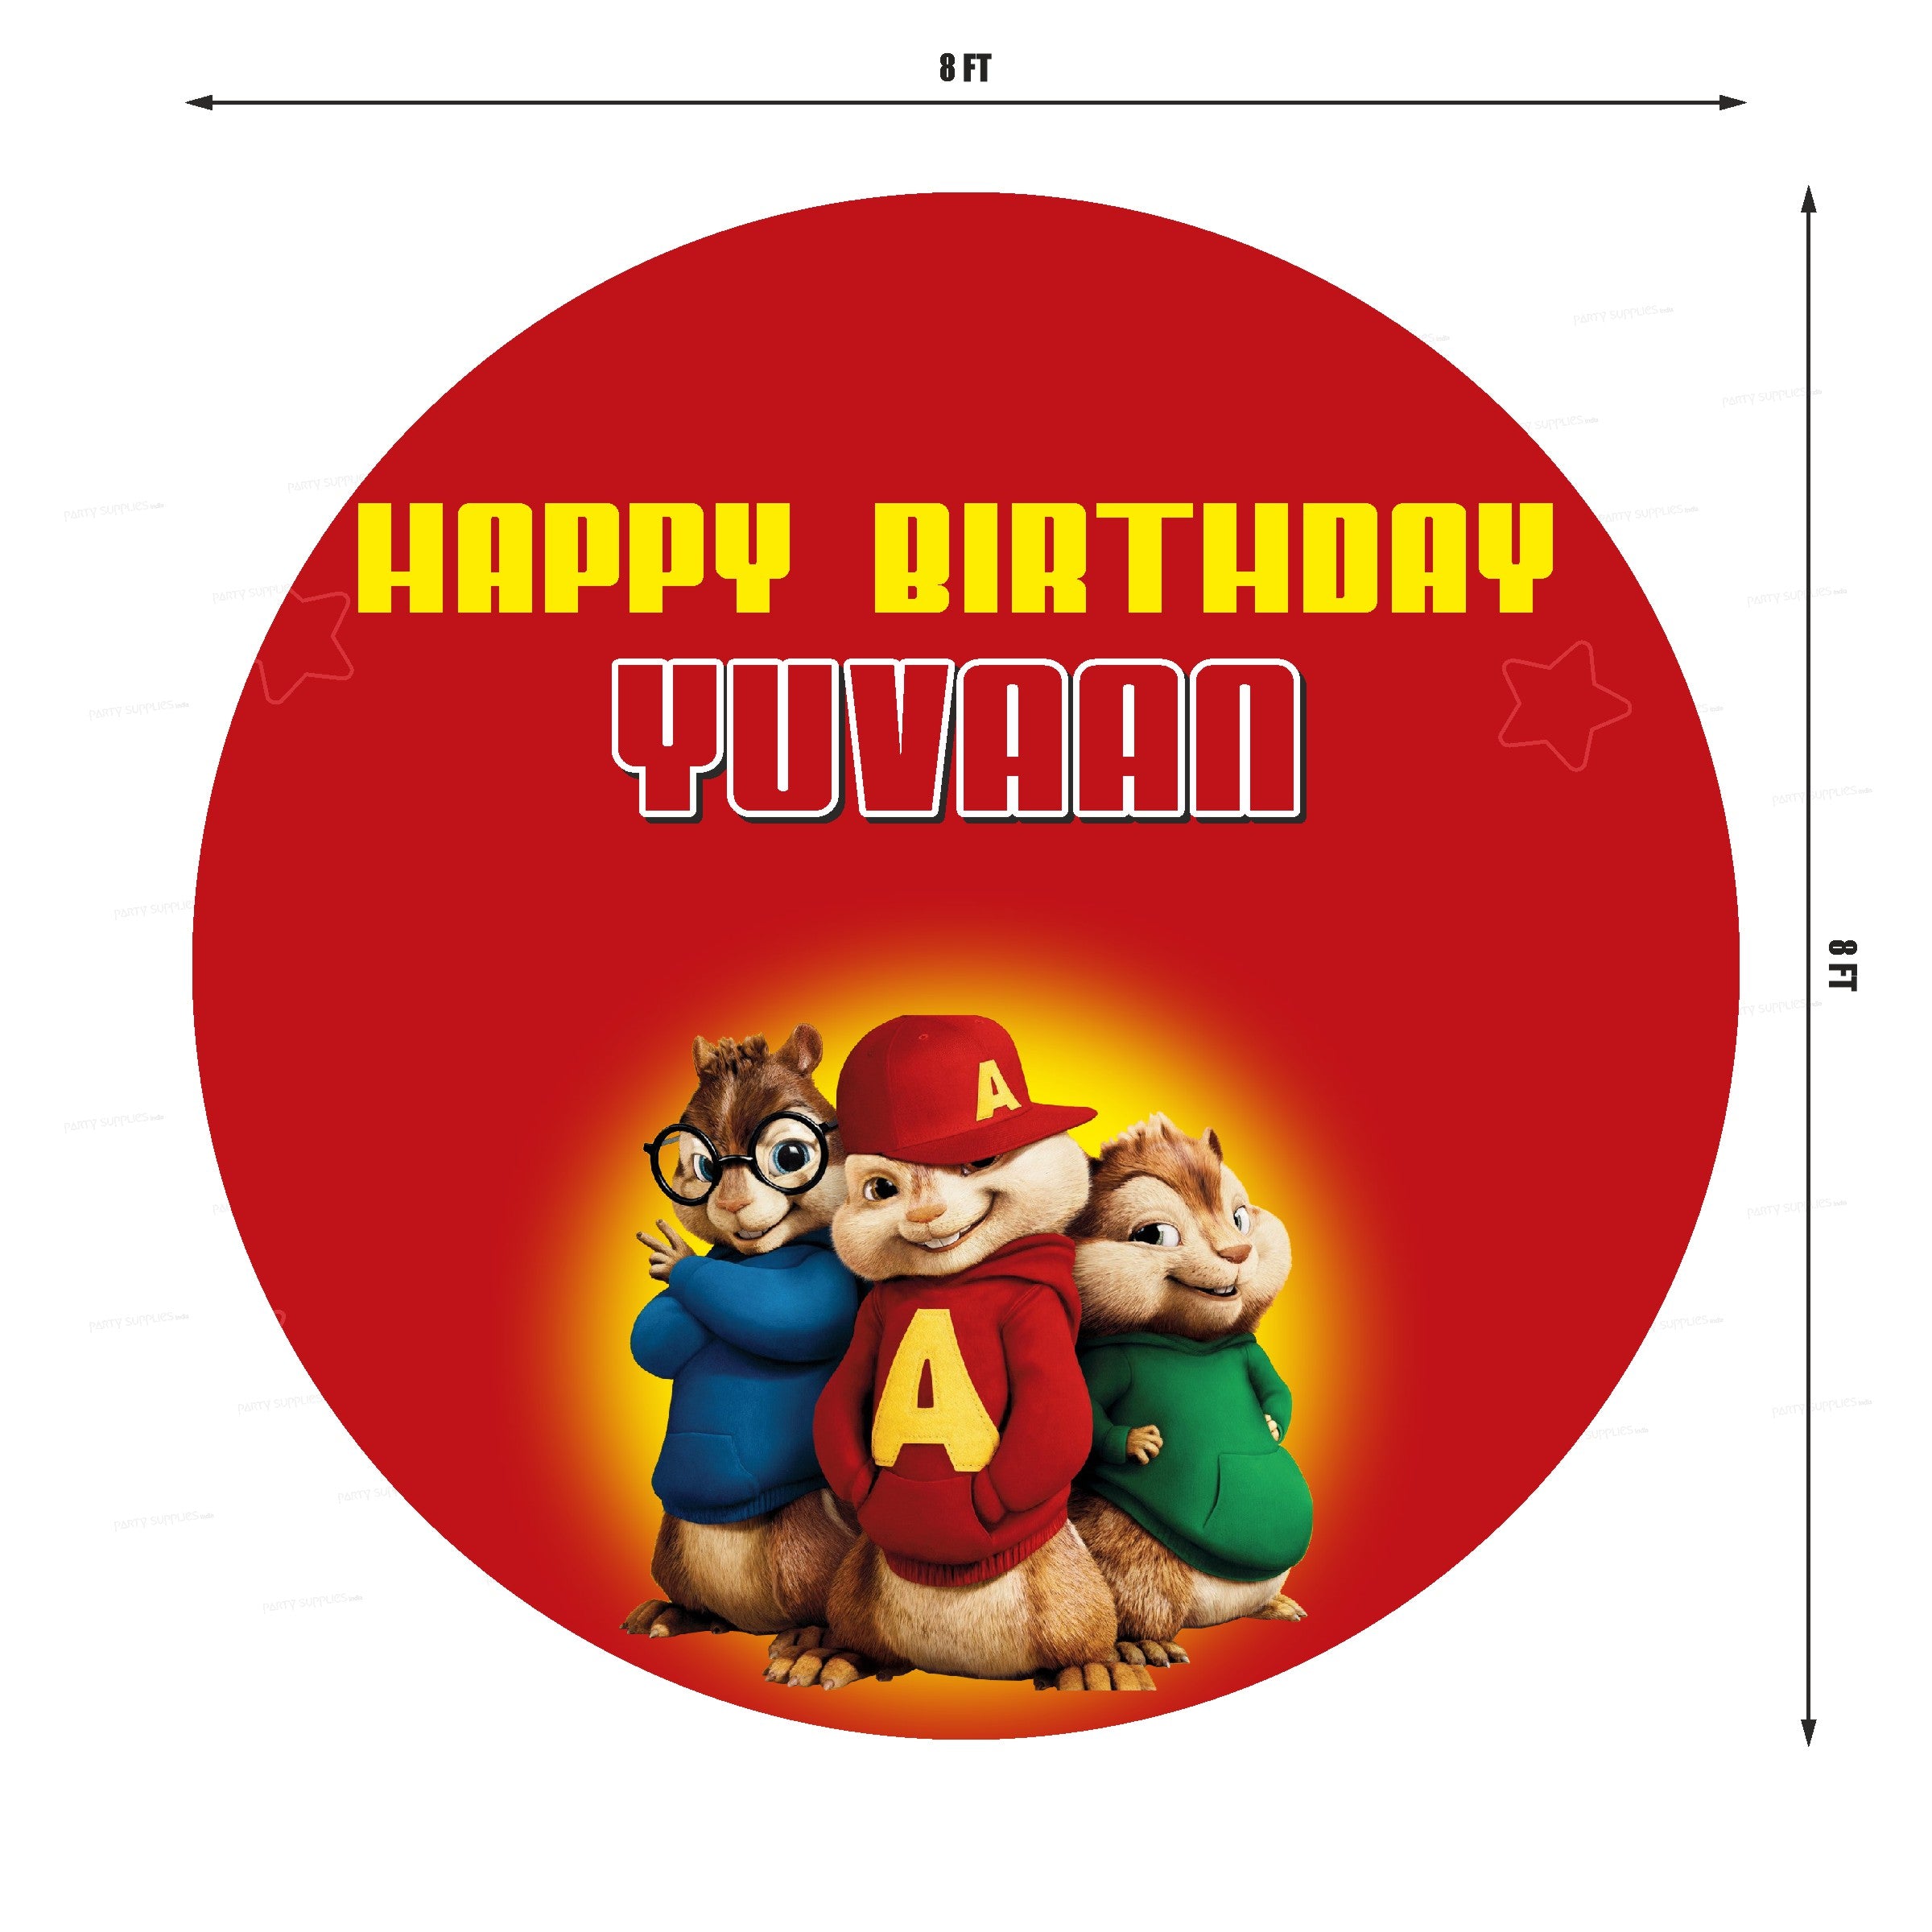 PSI Alvin and Chipmunks Theme Personalized Backdrop